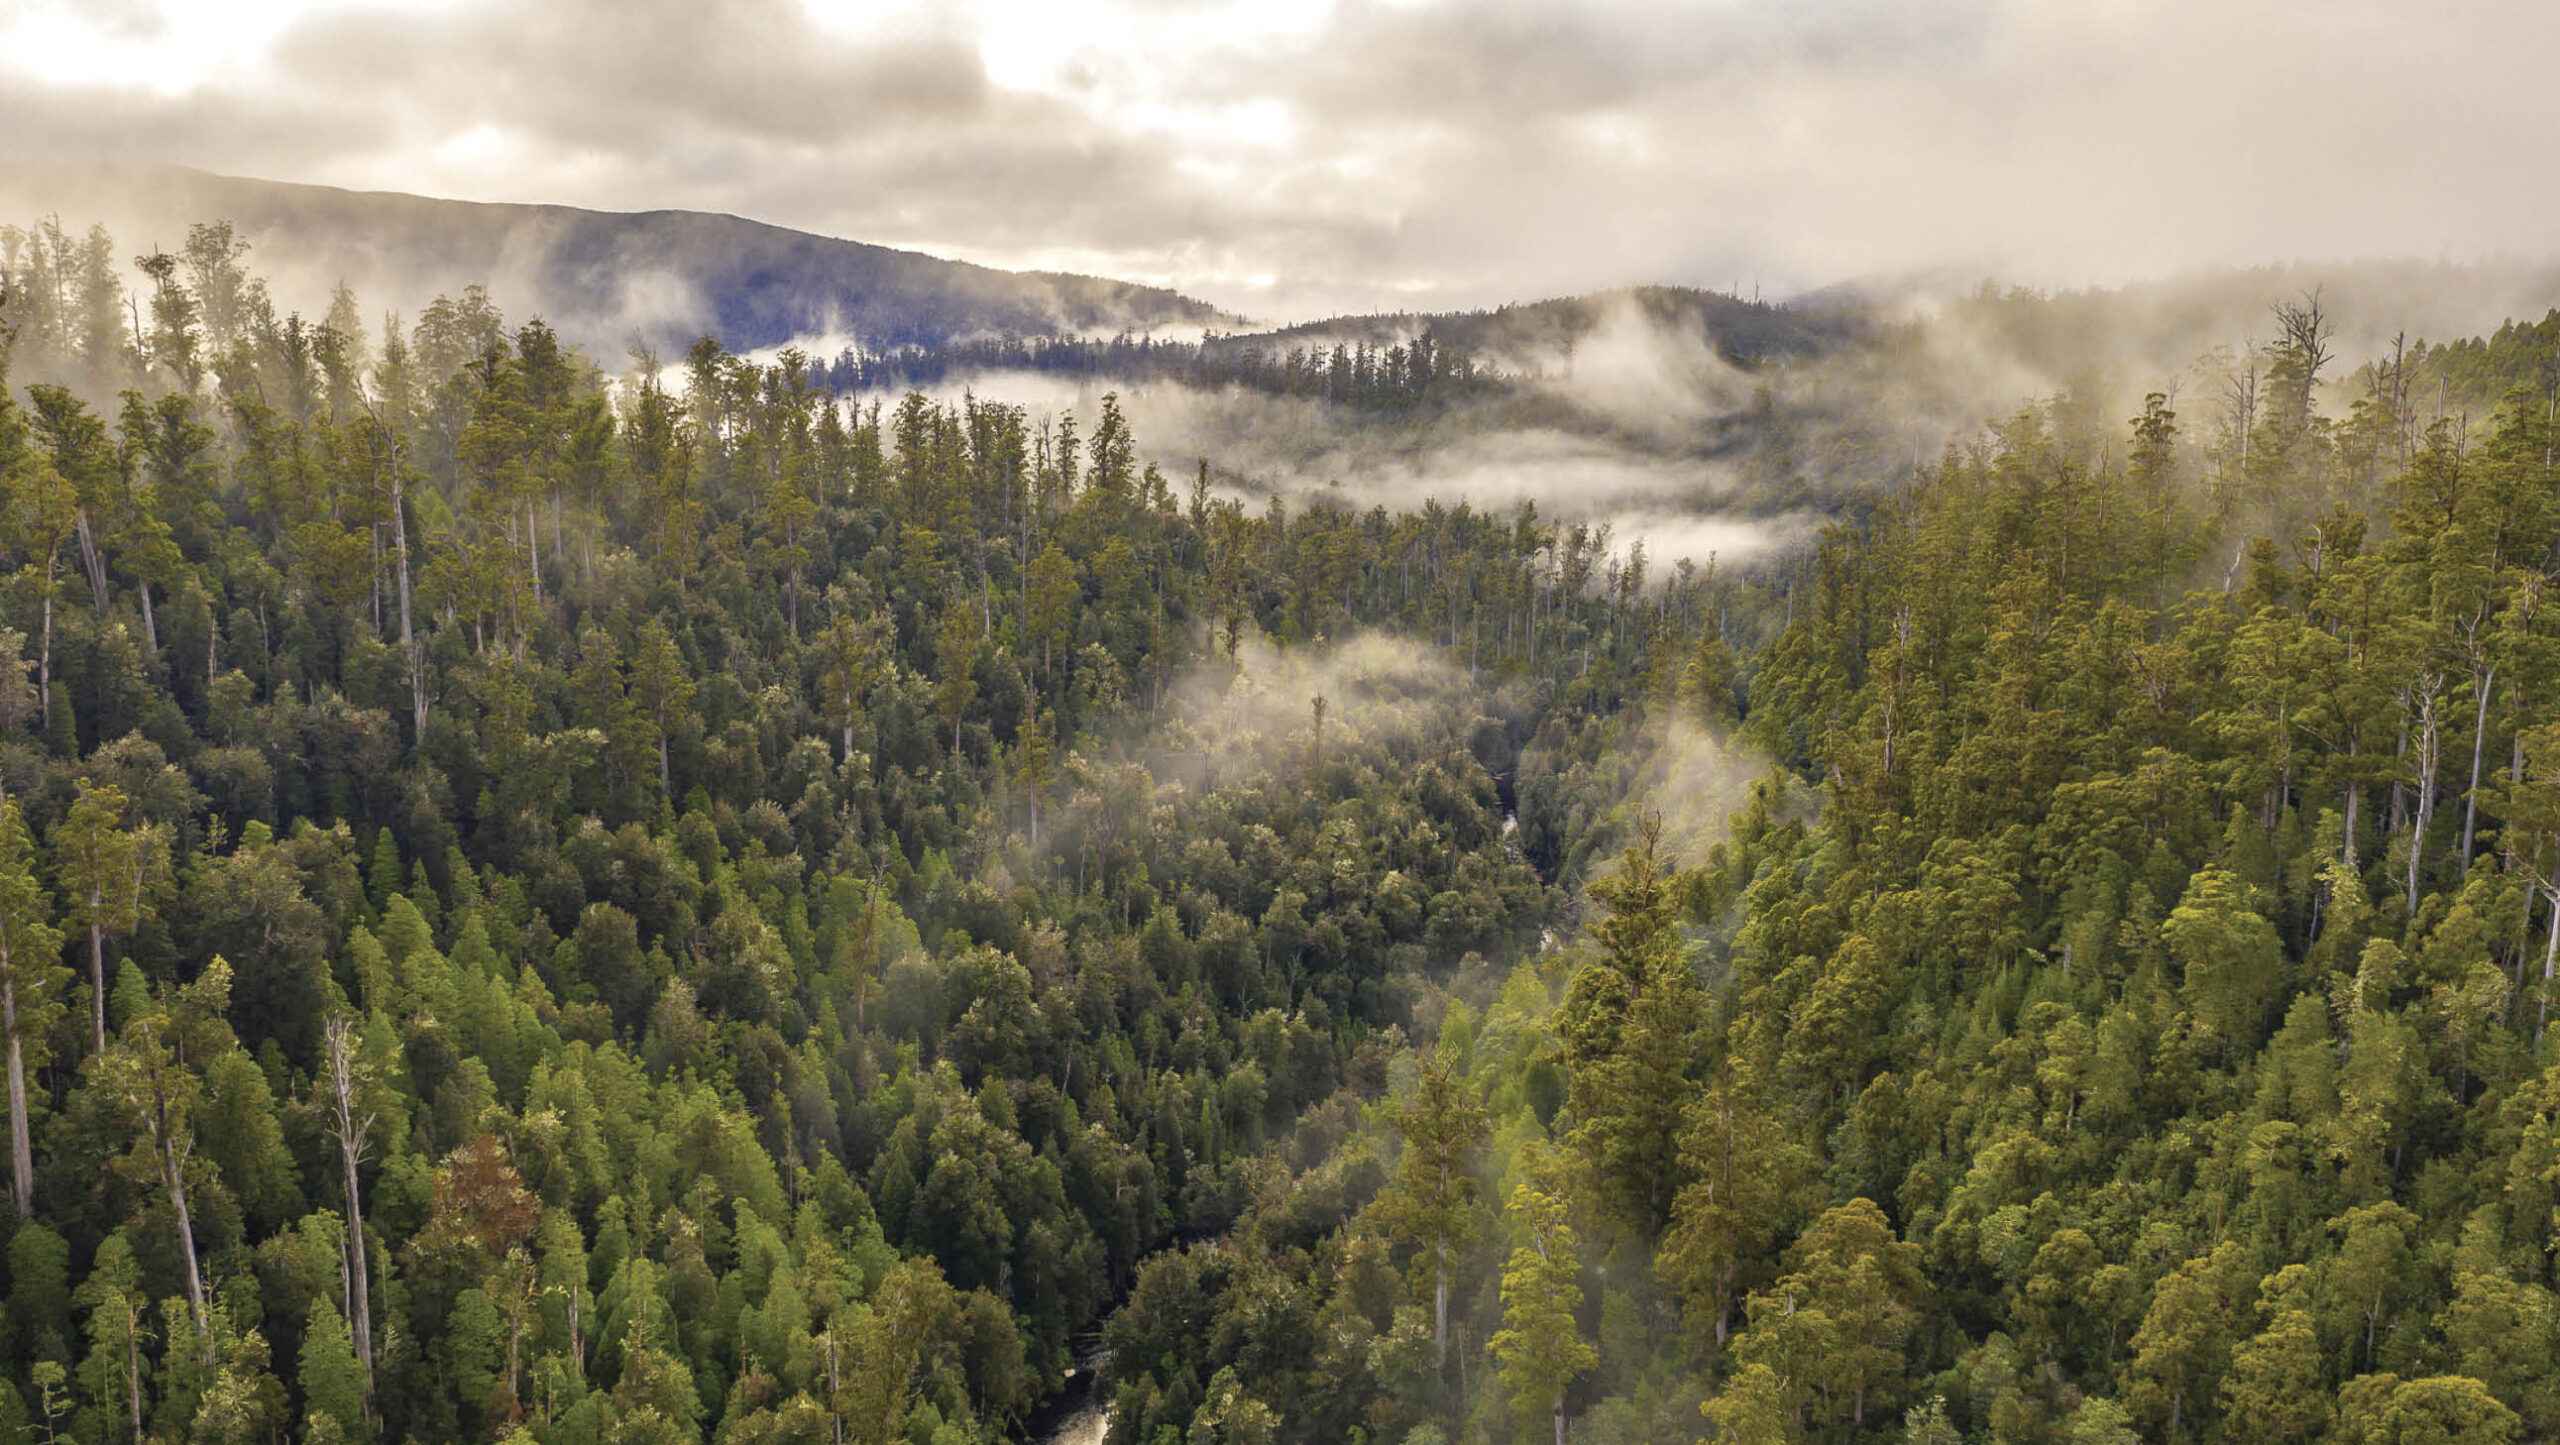 Native forests help with controlling carbon emissions.